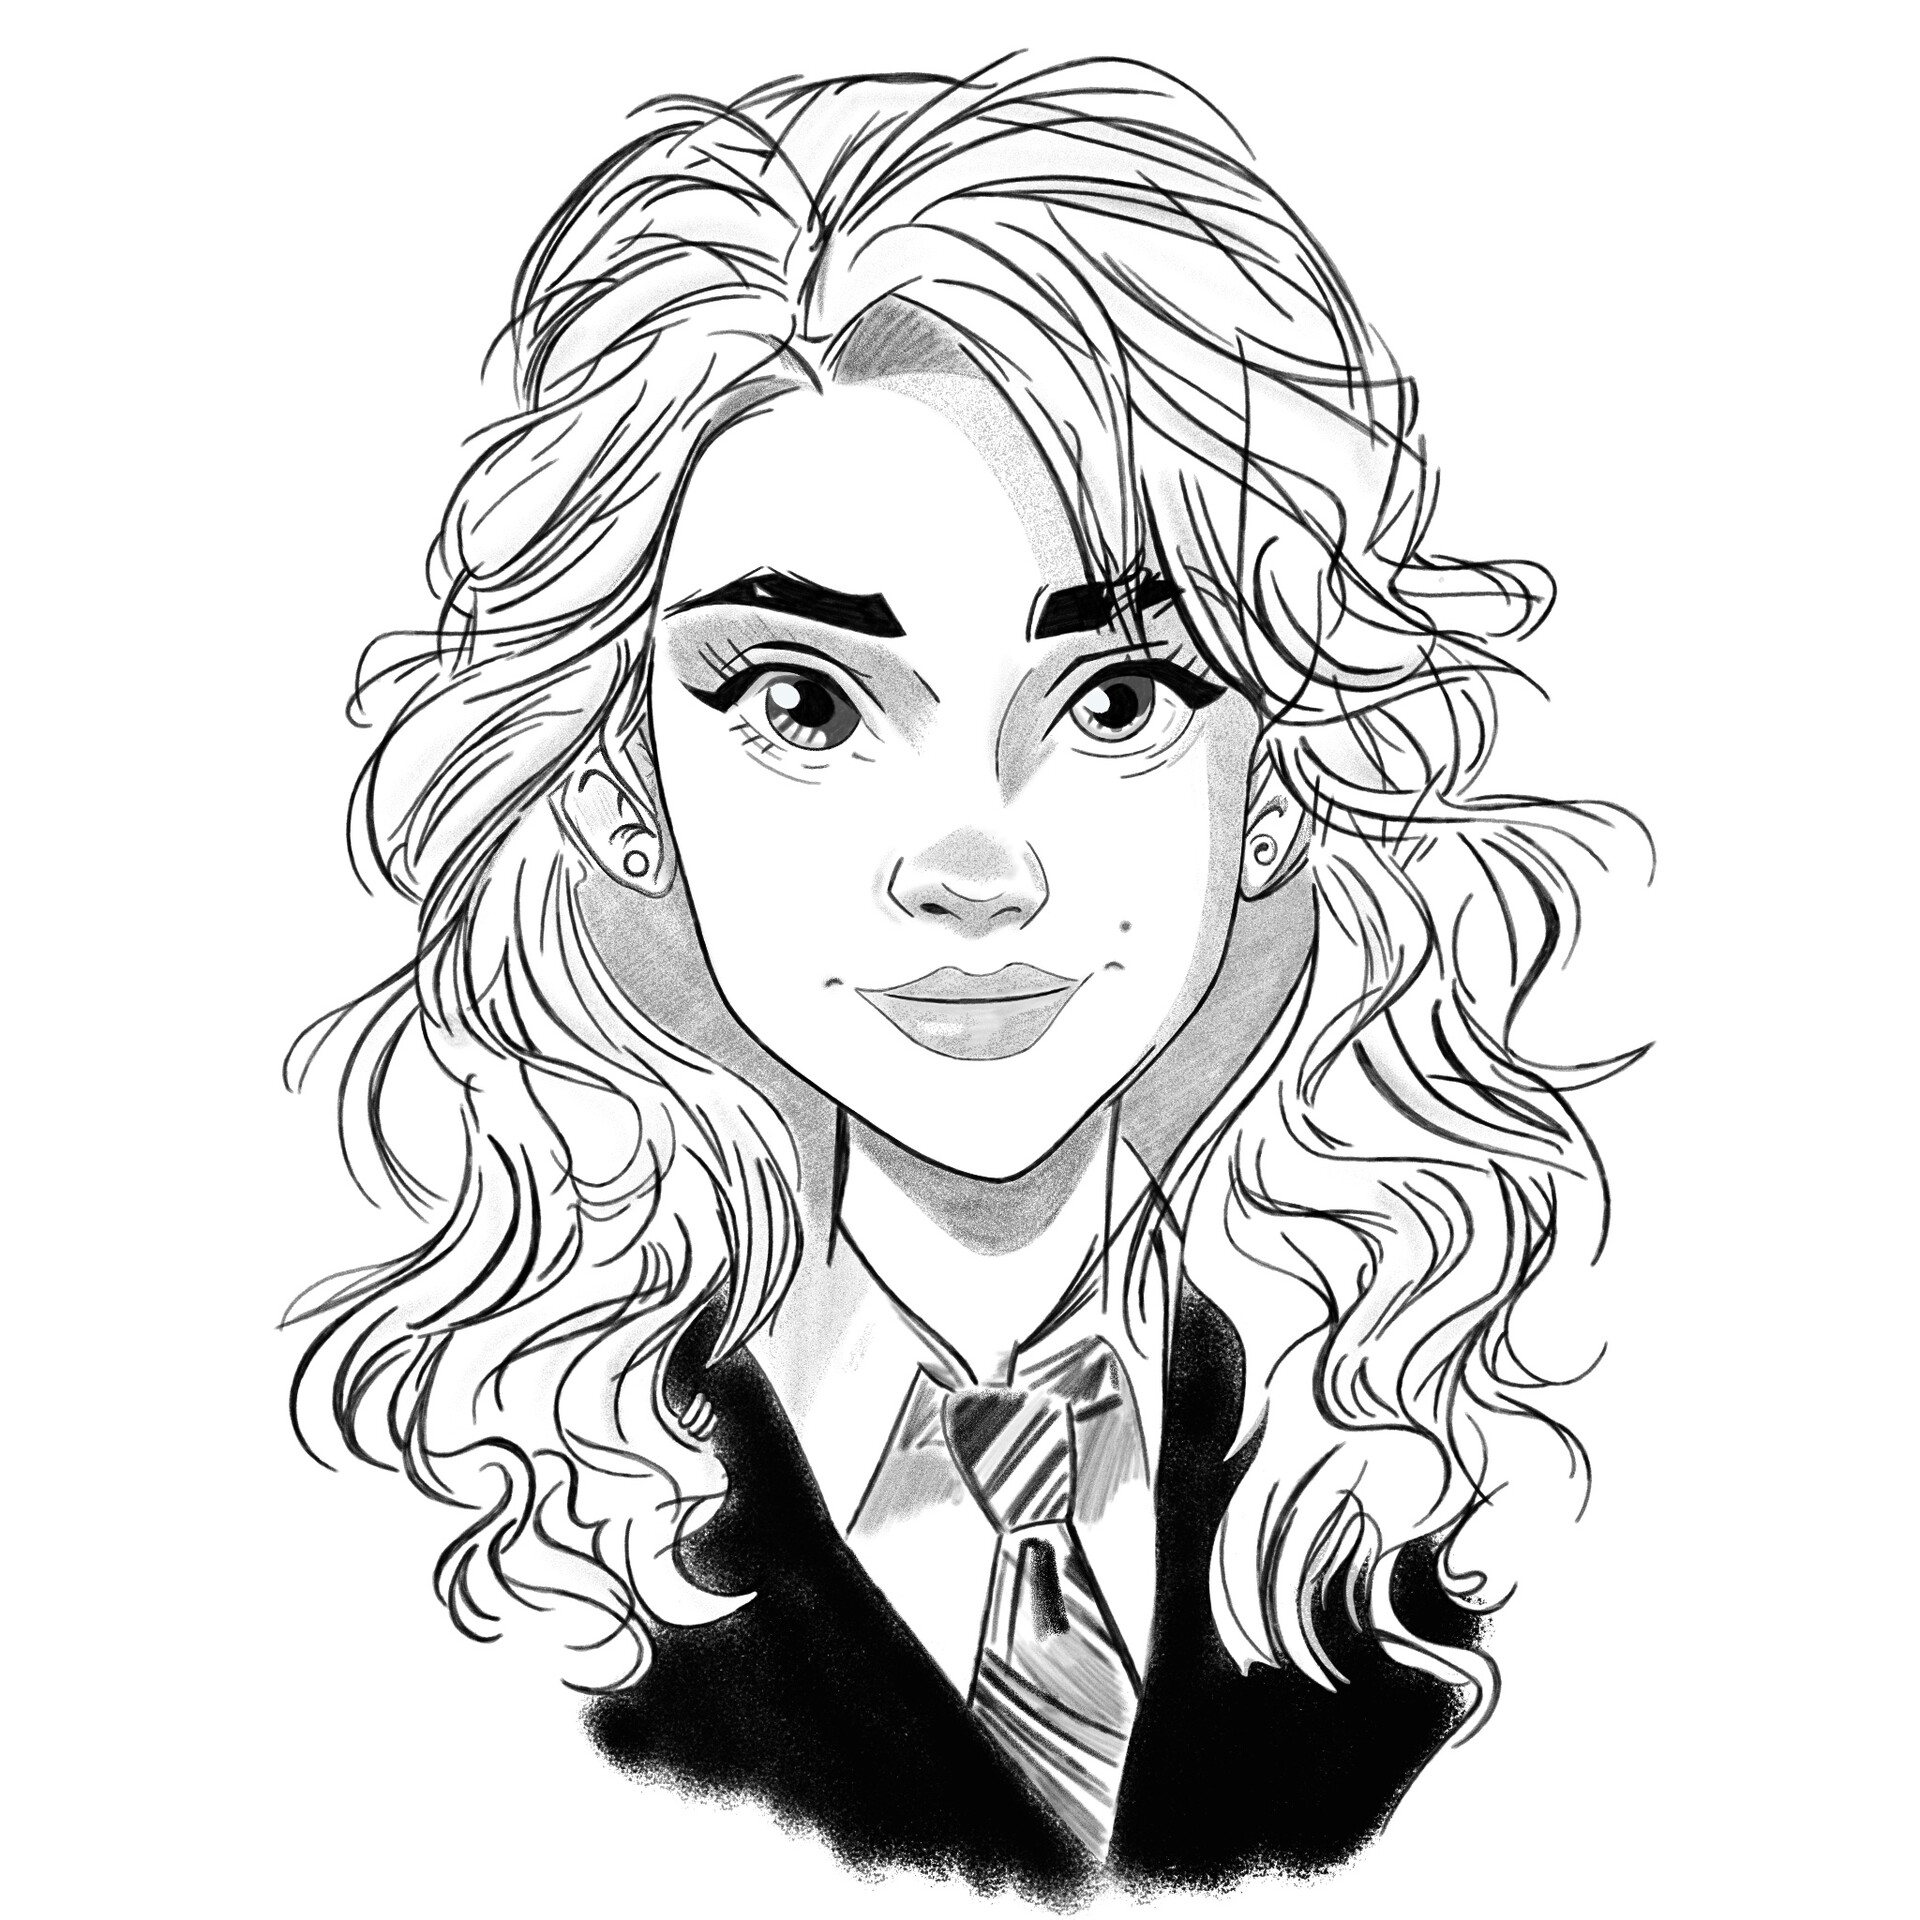 Hermione Granger, Book of Heroes and Villains Wiki